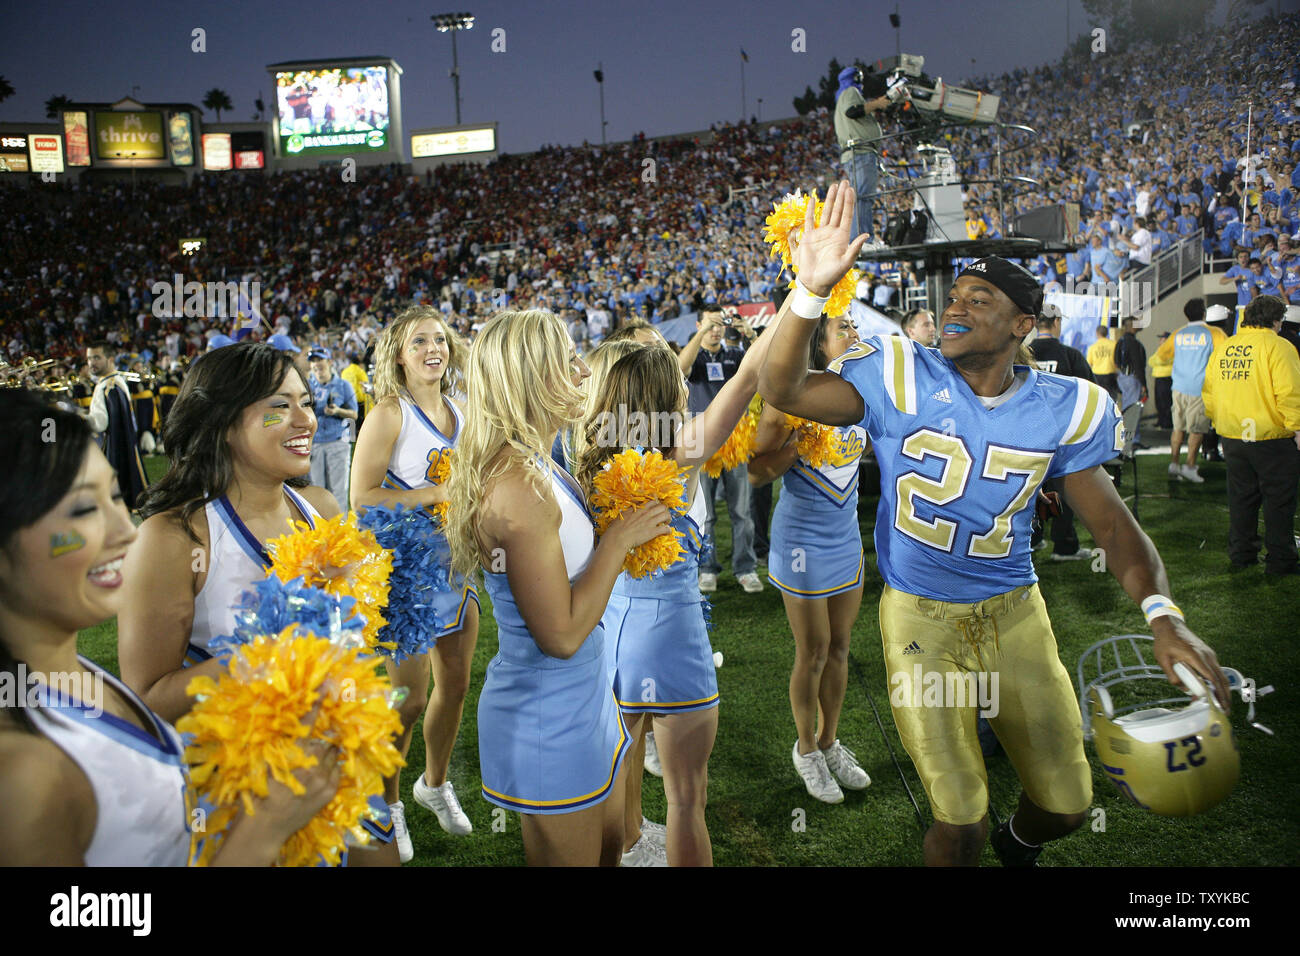 UCLA safety Aaron Ware high fives cheerleaders after defeating USC at the Rose Bowl 13-9 in Pasadena, California on December 2, 2006. UCLA's win keeps USC out of the Bowl Championship Series Game. (UPI Photo/Jon SooHoo) Stock Photo